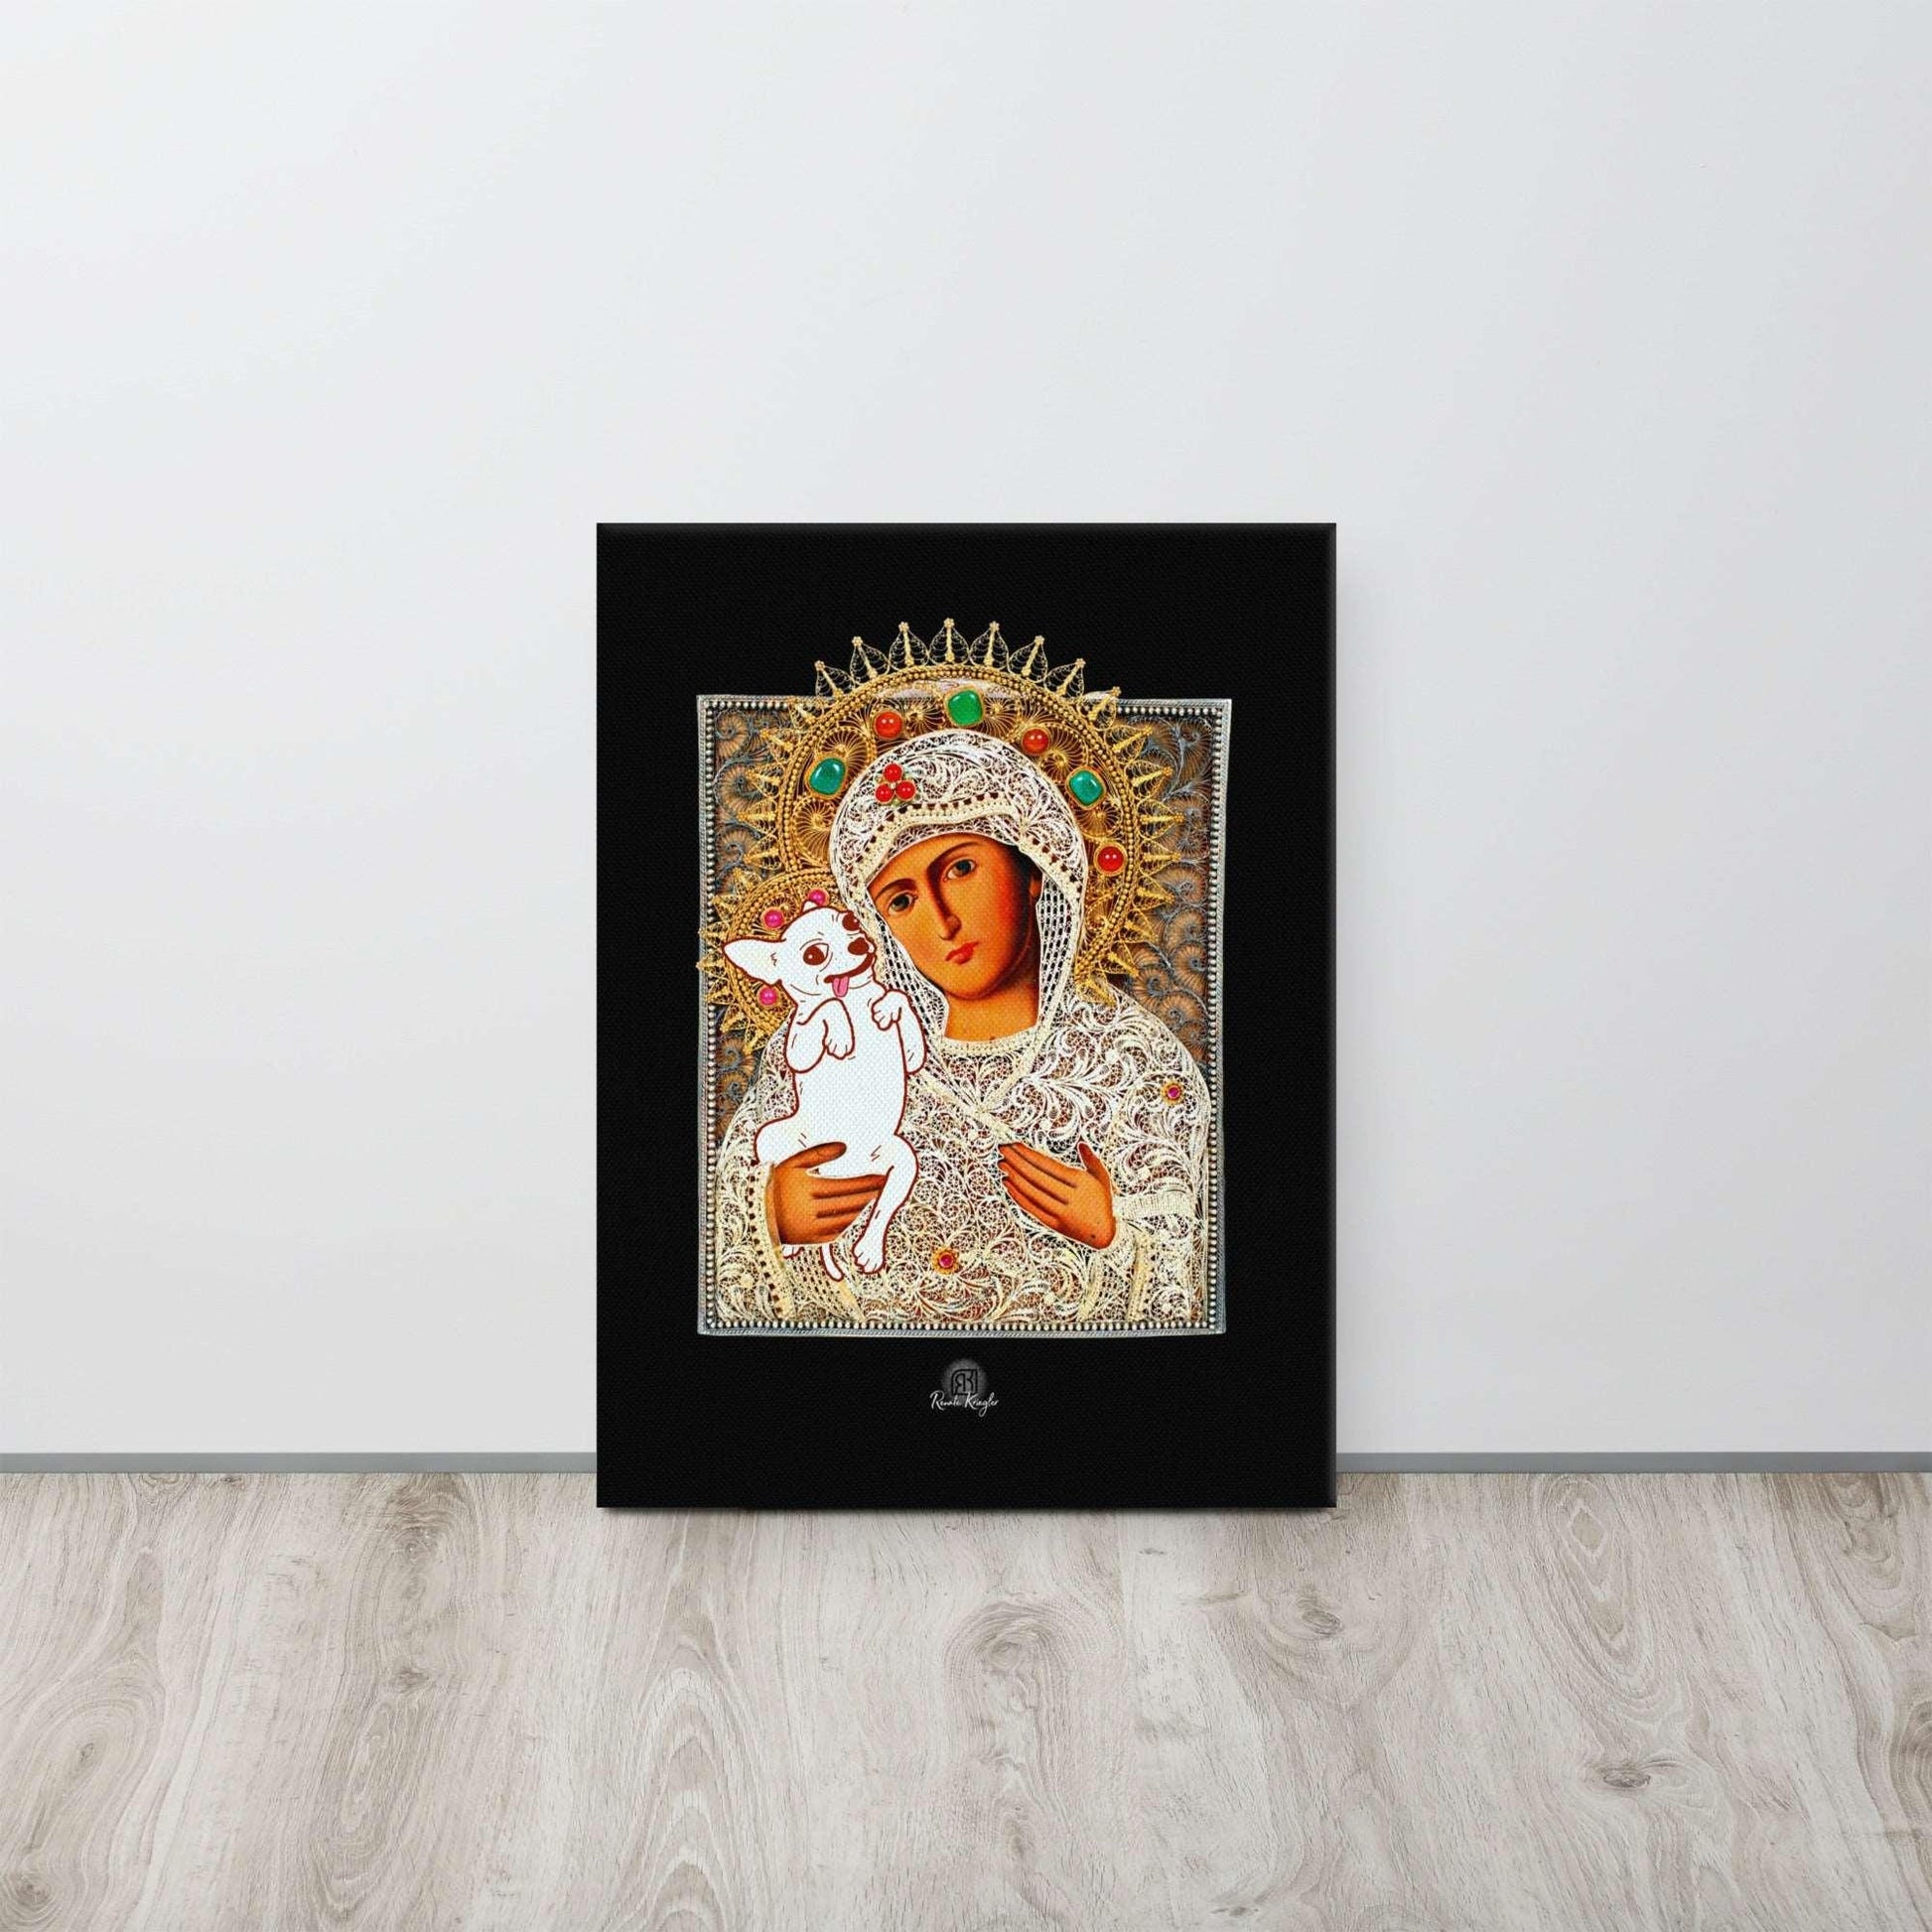 ChiMama - Chi Mama - Chihuahua Mama. Madonna and child icon artist's collage on black background by Renate Kriegler. Durable art print on hand-stretched canvas. Different and stylish gift idea for a doting chihuahua mummy and her spoilt pup. Perfect for Mother's Day / Mothering Sunday.